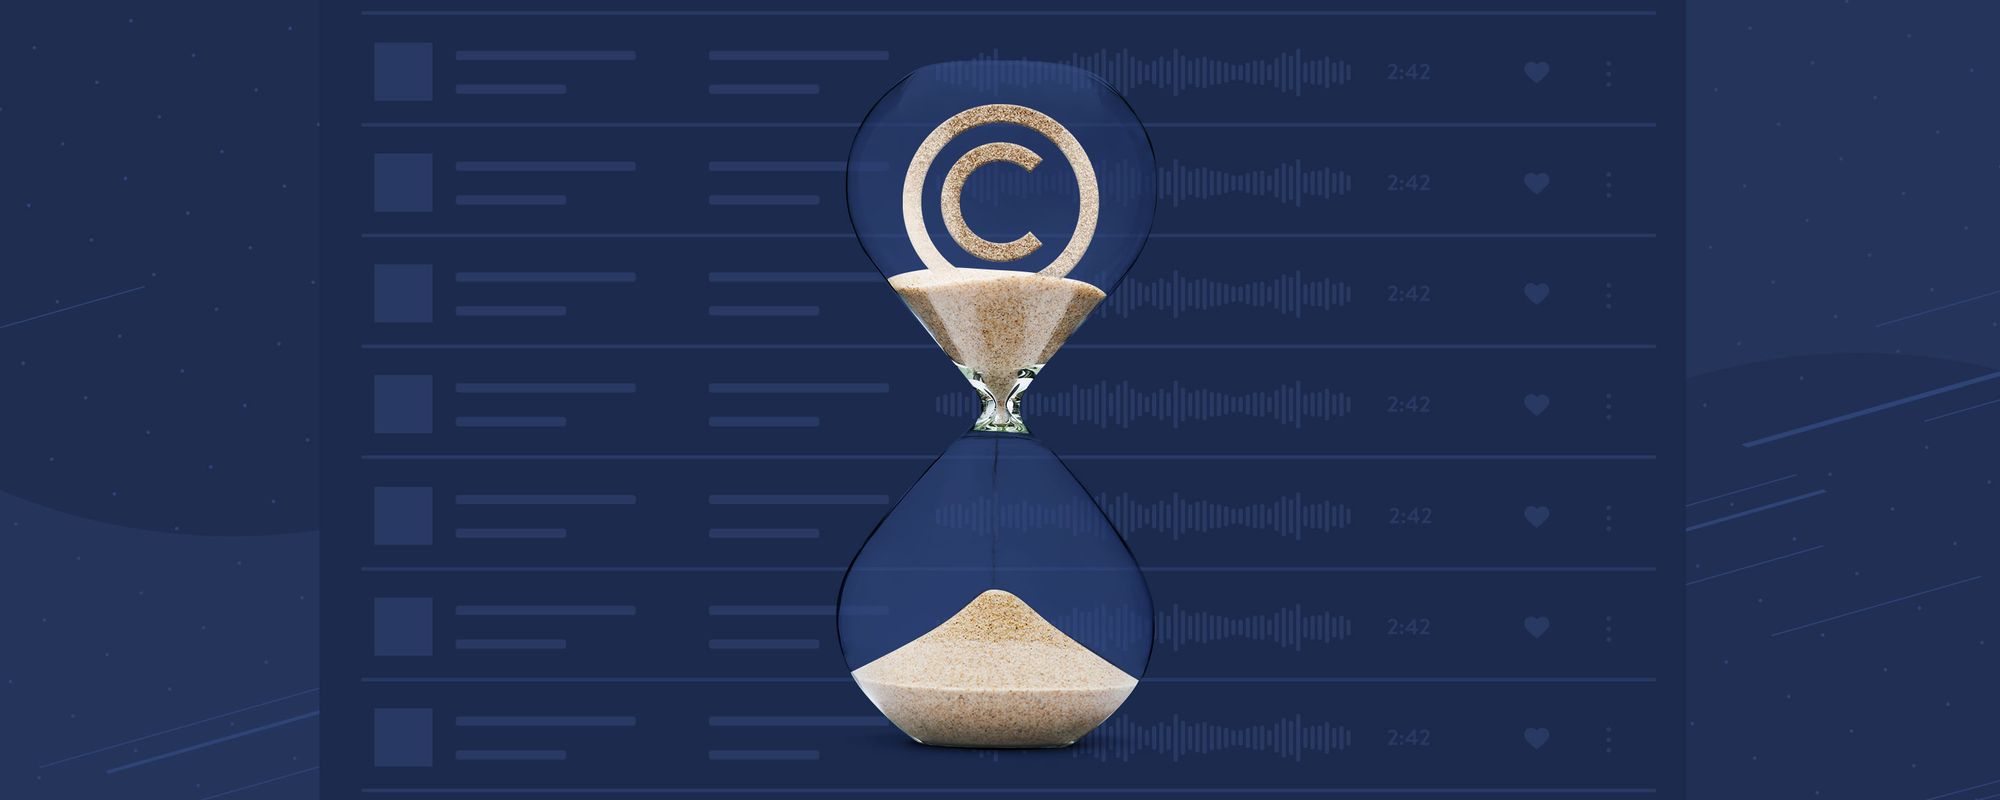 Image of an hourglass with a copyright logo to accompany an explanation of how long music copyright lasts for songs.